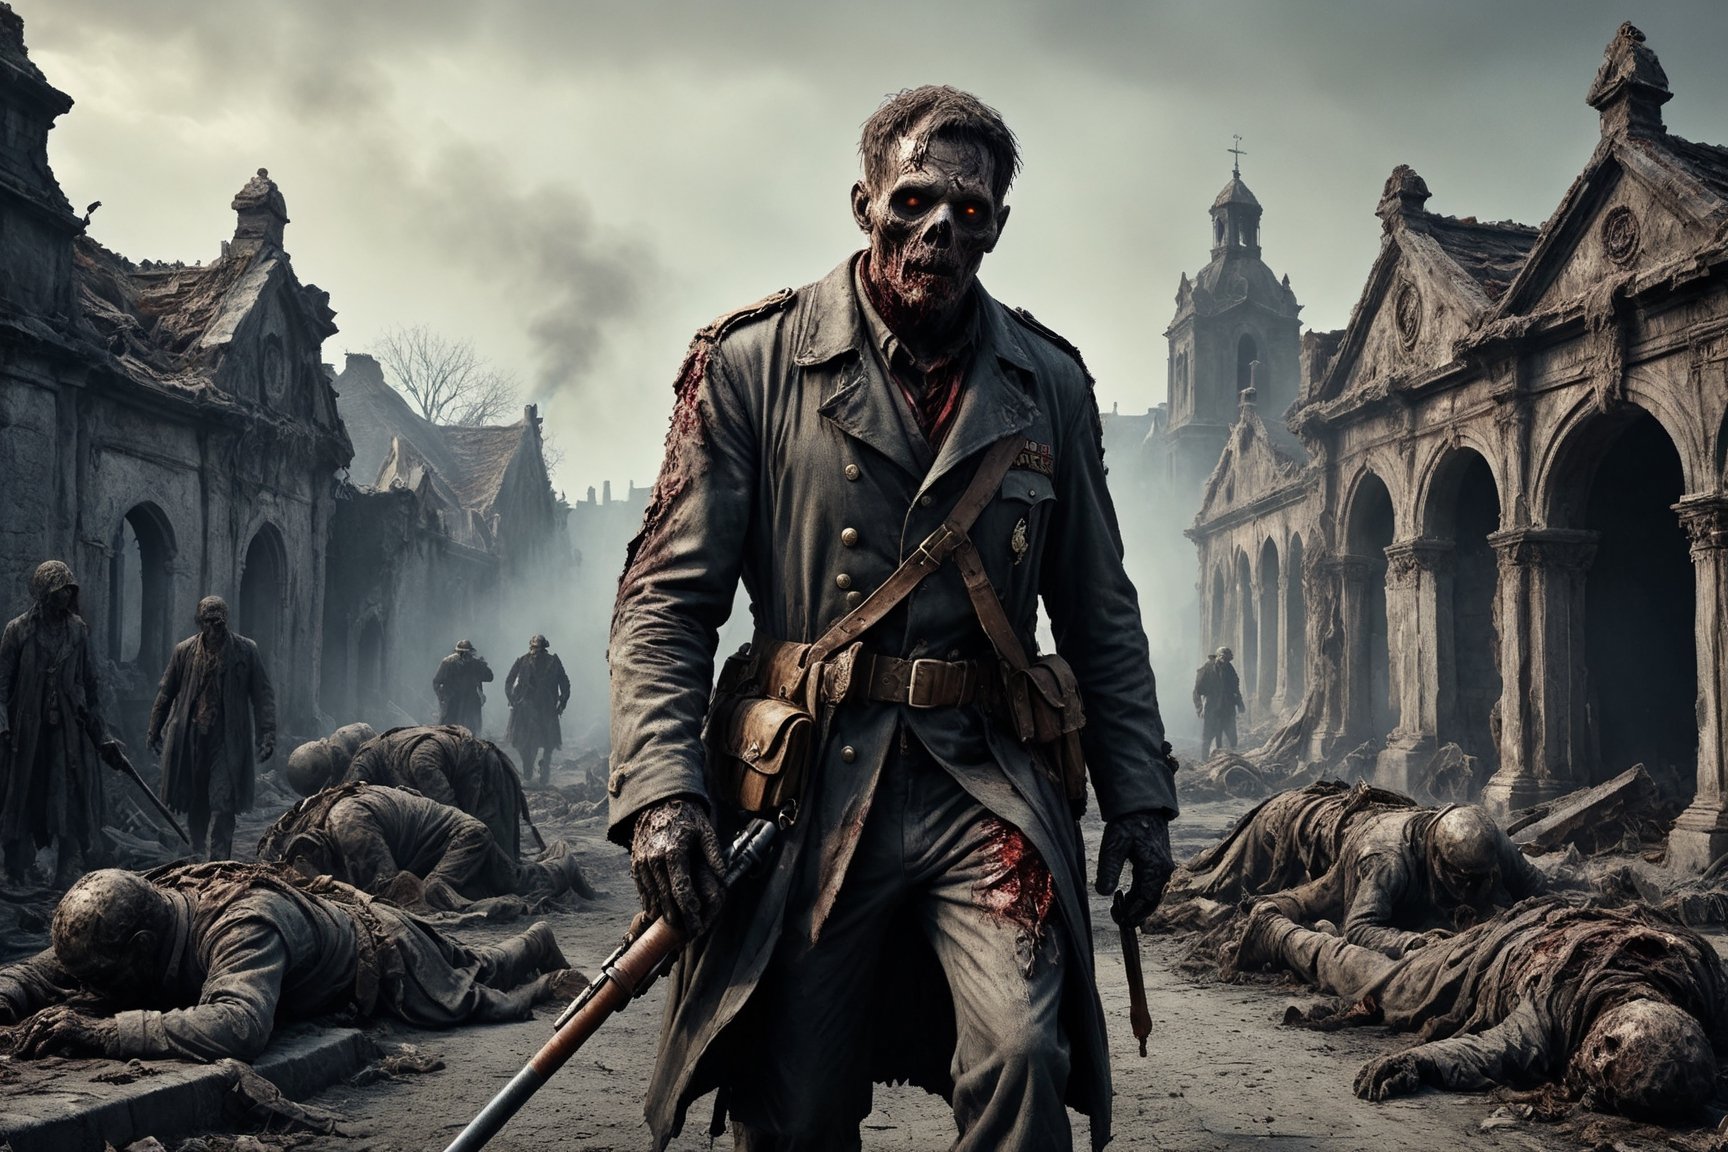 army officer of WWII zombie, putrid skin, disfigured features, torn, dirty and bloody clothes, walking along a path that borders a graveyard, dismembered bodies on the ground, burst artillery cannon, spooky atmosphere and atmosphere of terror, old town ruins on fire in Background, 16k UHD, extreme realism, maximum definitions, ultra detail,monster,steampunk style